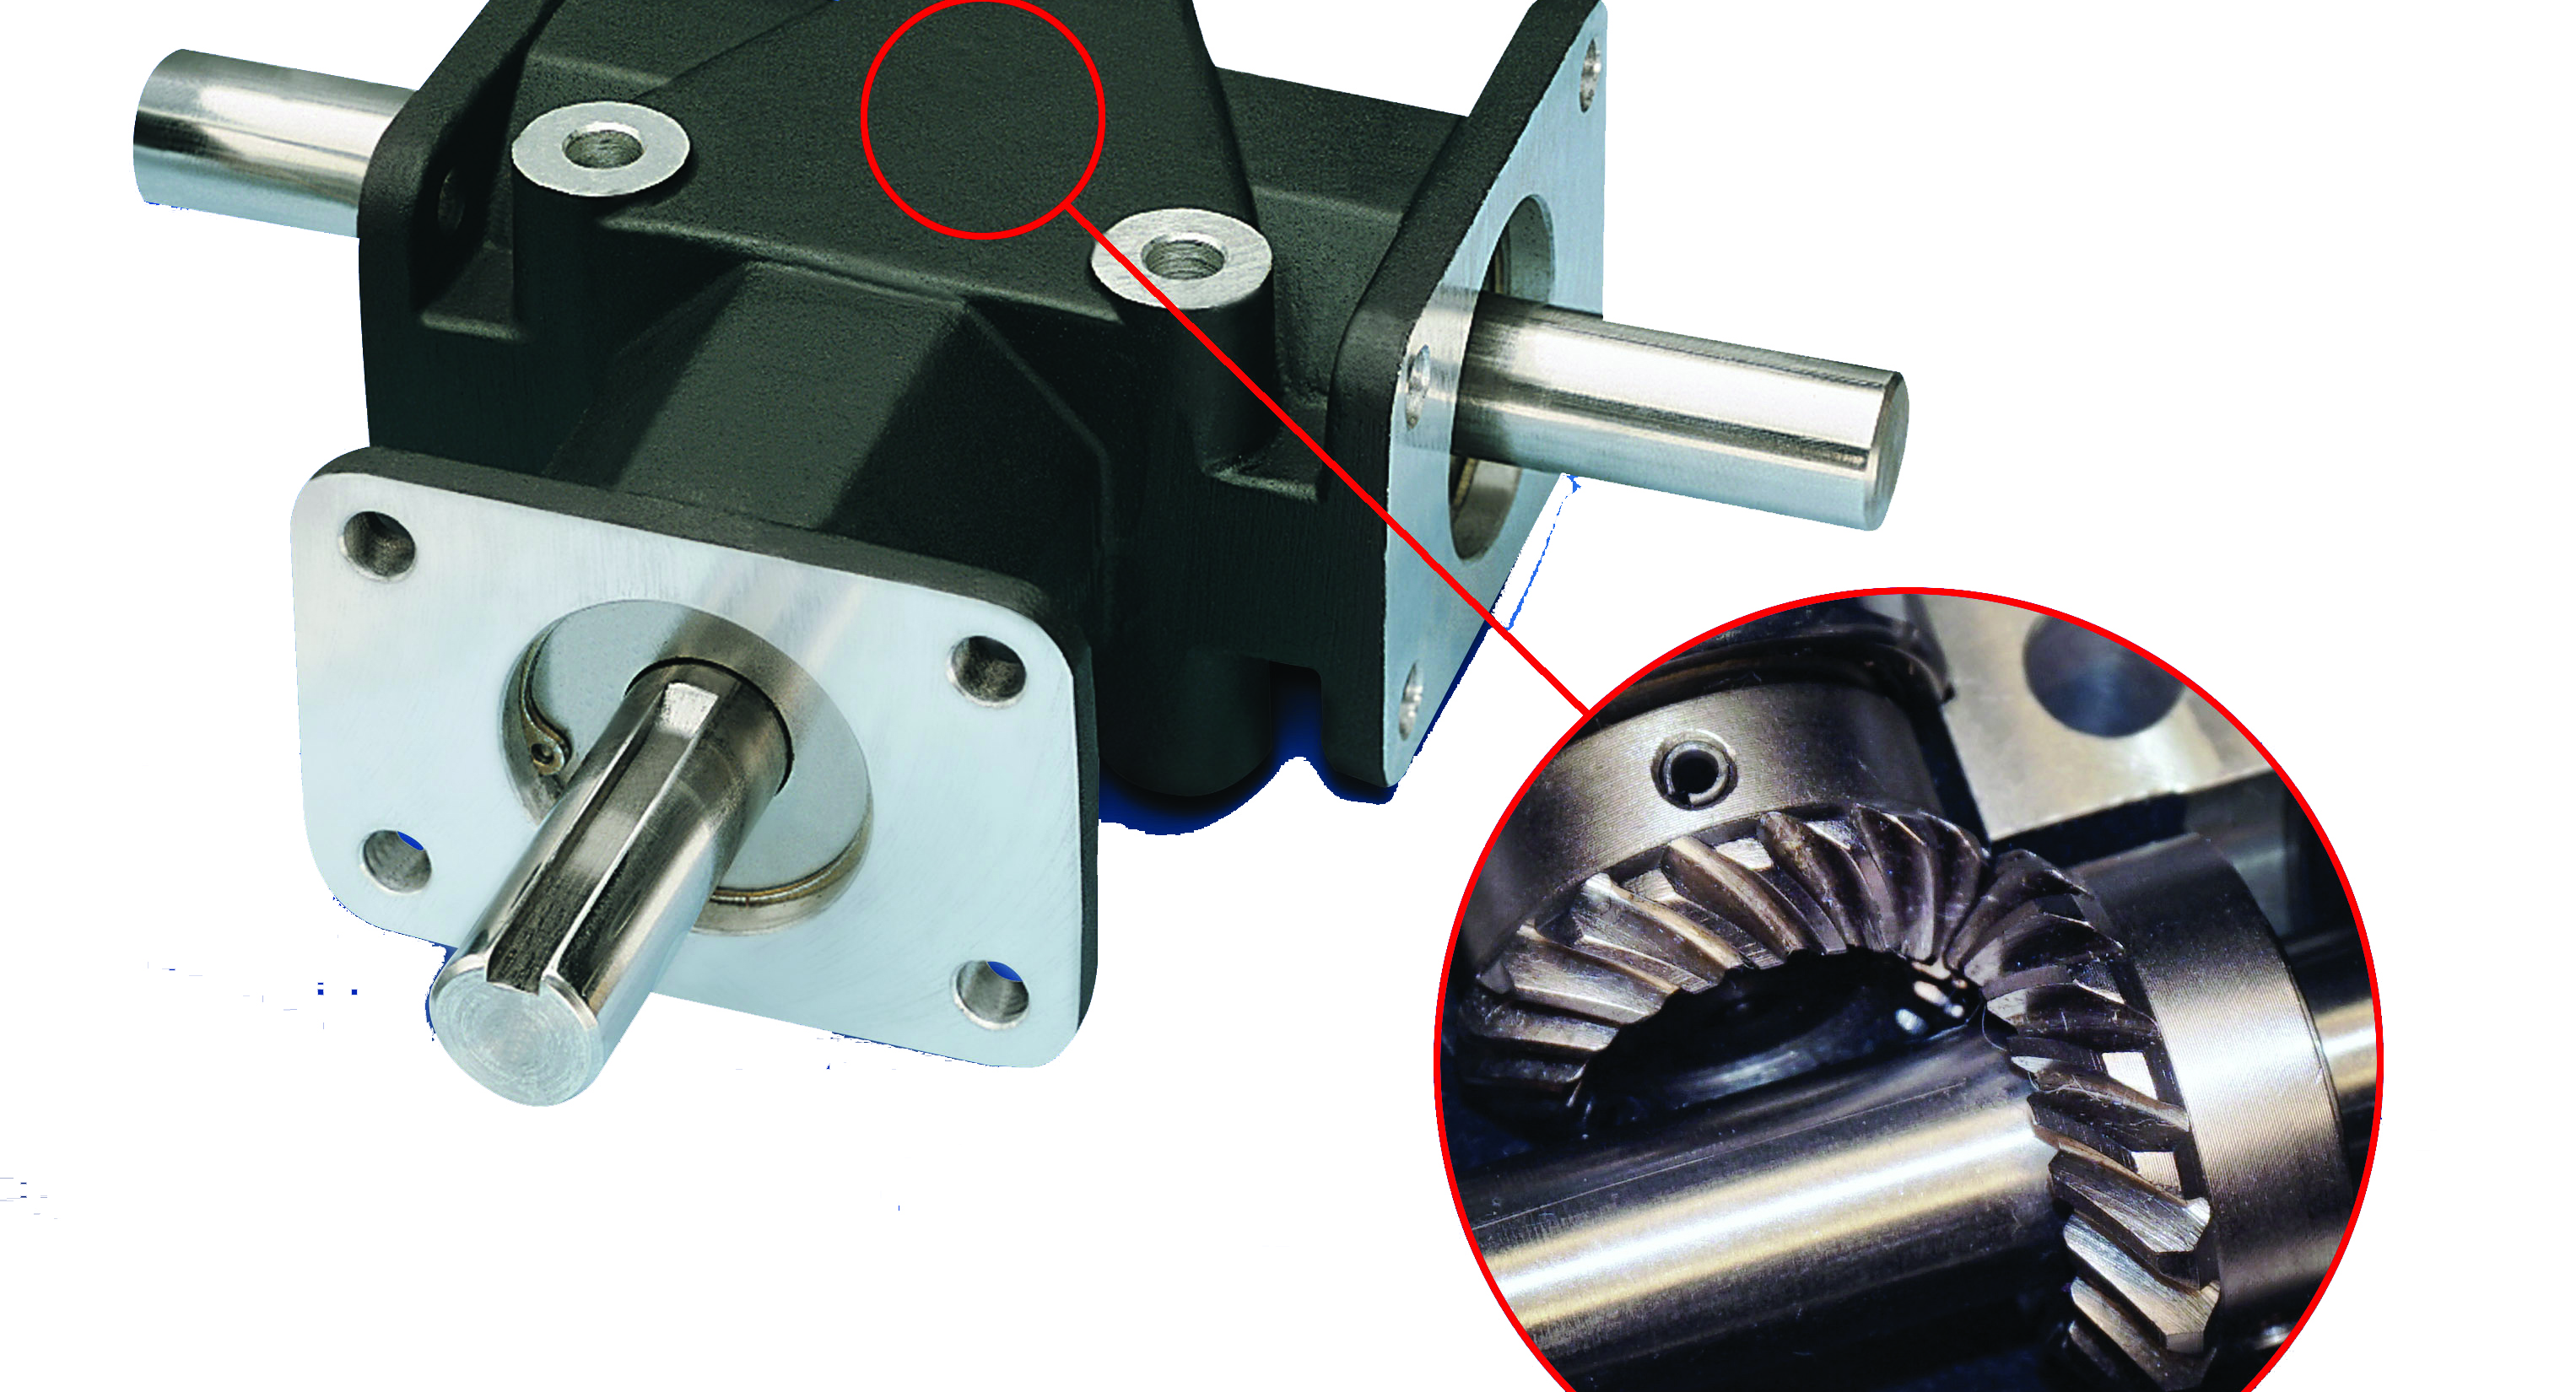 Zero-Max Crown right-angle drives include Class 10 spiral bevel